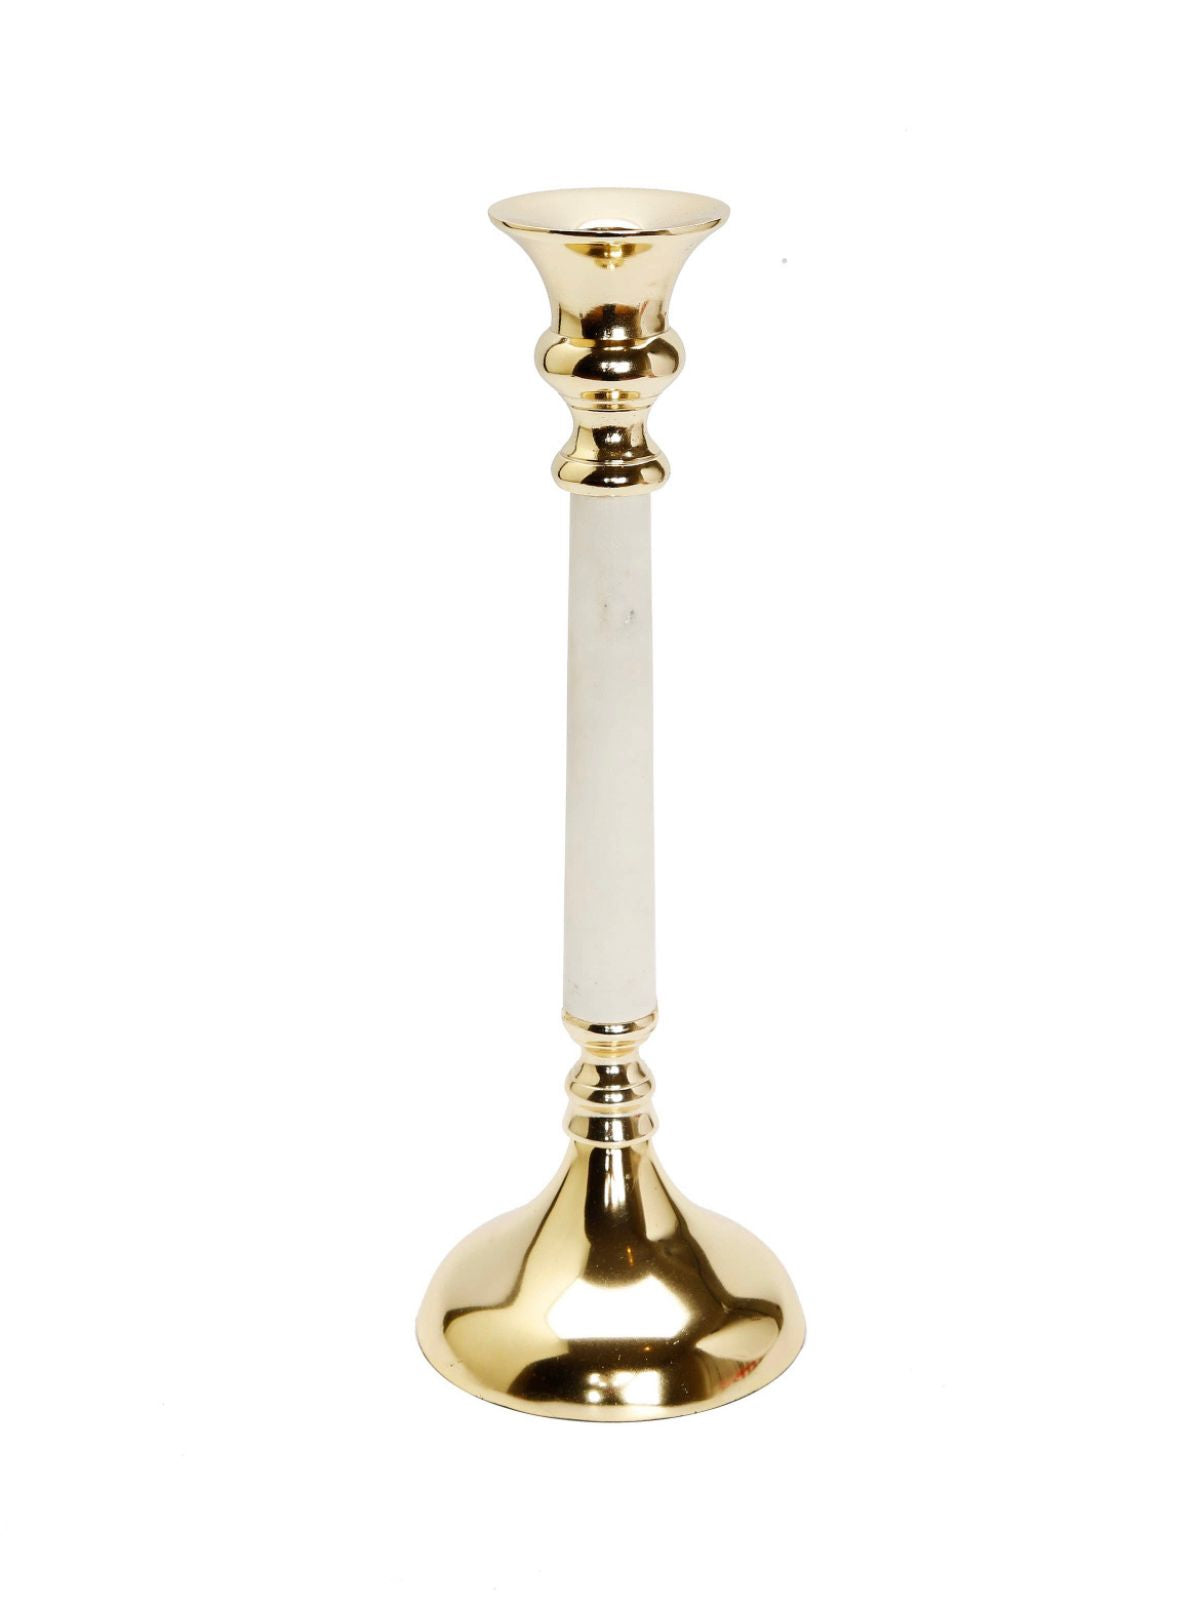 13H Gold Pillar Candle Holder with Marble Stem and Gold Metal Base. Sold by KYA Home Decor.